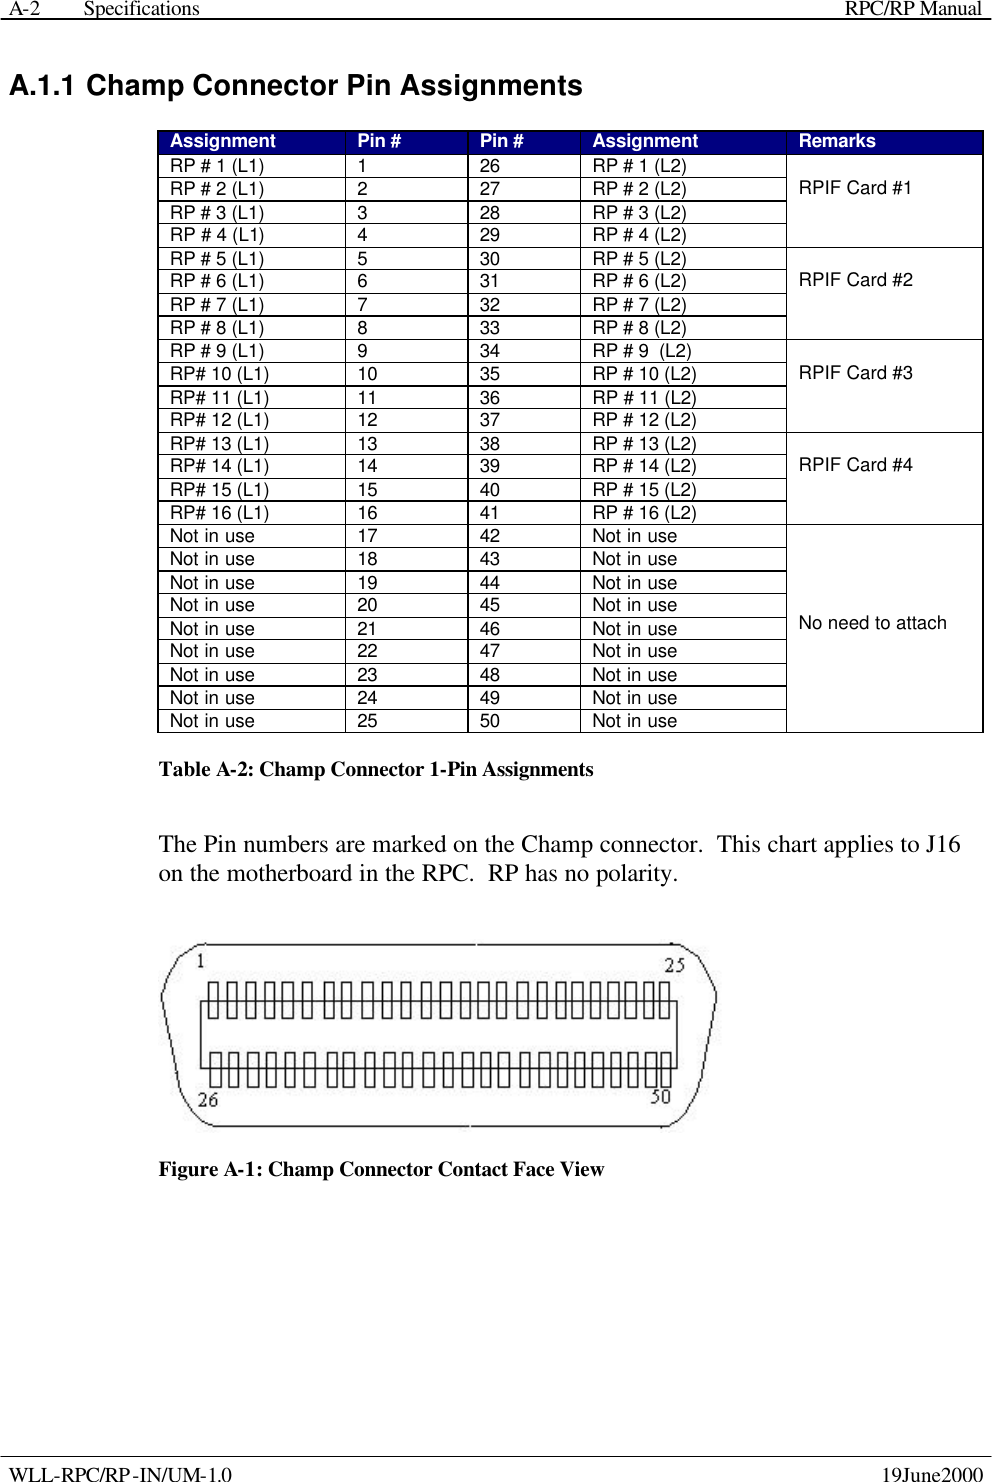  Specifications    RPC/RP Manual WLL-RPC/RP-IN/UM-1.0    19June2000 A-2A.1.1 Champ Connector Pin Assignments Assignment Pin # Pin # Assignment Remarks RP # 1 (L1) 1 26 RP # 1 (L2) RP # 2 (L1) 2 27 RP # 2 (L2) RP # 3 (L1) 3 28 RP # 3 (L2) RP # 4 (L1) 4 29 RP # 4 (L2)  RPIF Card #1 RP # 5 (L1) 5 30 RP # 5 (L2) RP # 6 (L1) 6 31 RP # 6 (L2) RP # 7 (L1) 7 32 RP # 7 (L2) RP # 8 (L1) 8 33 RP # 8 (L2)  RPIF Card #2 RP # 9 (L1) 9 34 RP # 9  (L2) RP# 10 (L1) 10 35 RP # 10 (L2) RP# 11 (L1) 11 36 RP # 11 (L2) RP# 12 (L1) 12 37 RP # 12 (L2)  RPIF Card #3 RP# 13 (L1) 13 38 RP # 13 (L2) RP# 14 (L1) 14 39 RP # 14 (L2) RP# 15 (L1) 15 40 RP # 15 (L2) RP# 16 (L1) 16 41 RP # 16 (L2)  RPIF Card #4 Not in use 17 42 Not in use Not in use 18 43 Not in use Not in use 19 44 Not in use Not in use 20 45 Not in use Not in use 21 46 Not in use Not in use 22 47 Not in use Not in use 23 48 Not in use Not in use 24 49 Not in use Not in use 25 50 Not in use     No need to attach Table A-2: Champ Connector 1-Pin Assignments The Pin numbers are marked on the Champ connector.  This chart applies to J16 on the motherboard in the RPC.  RP has no polarity.  Figure A-1: Champ Connector Contact Face View 